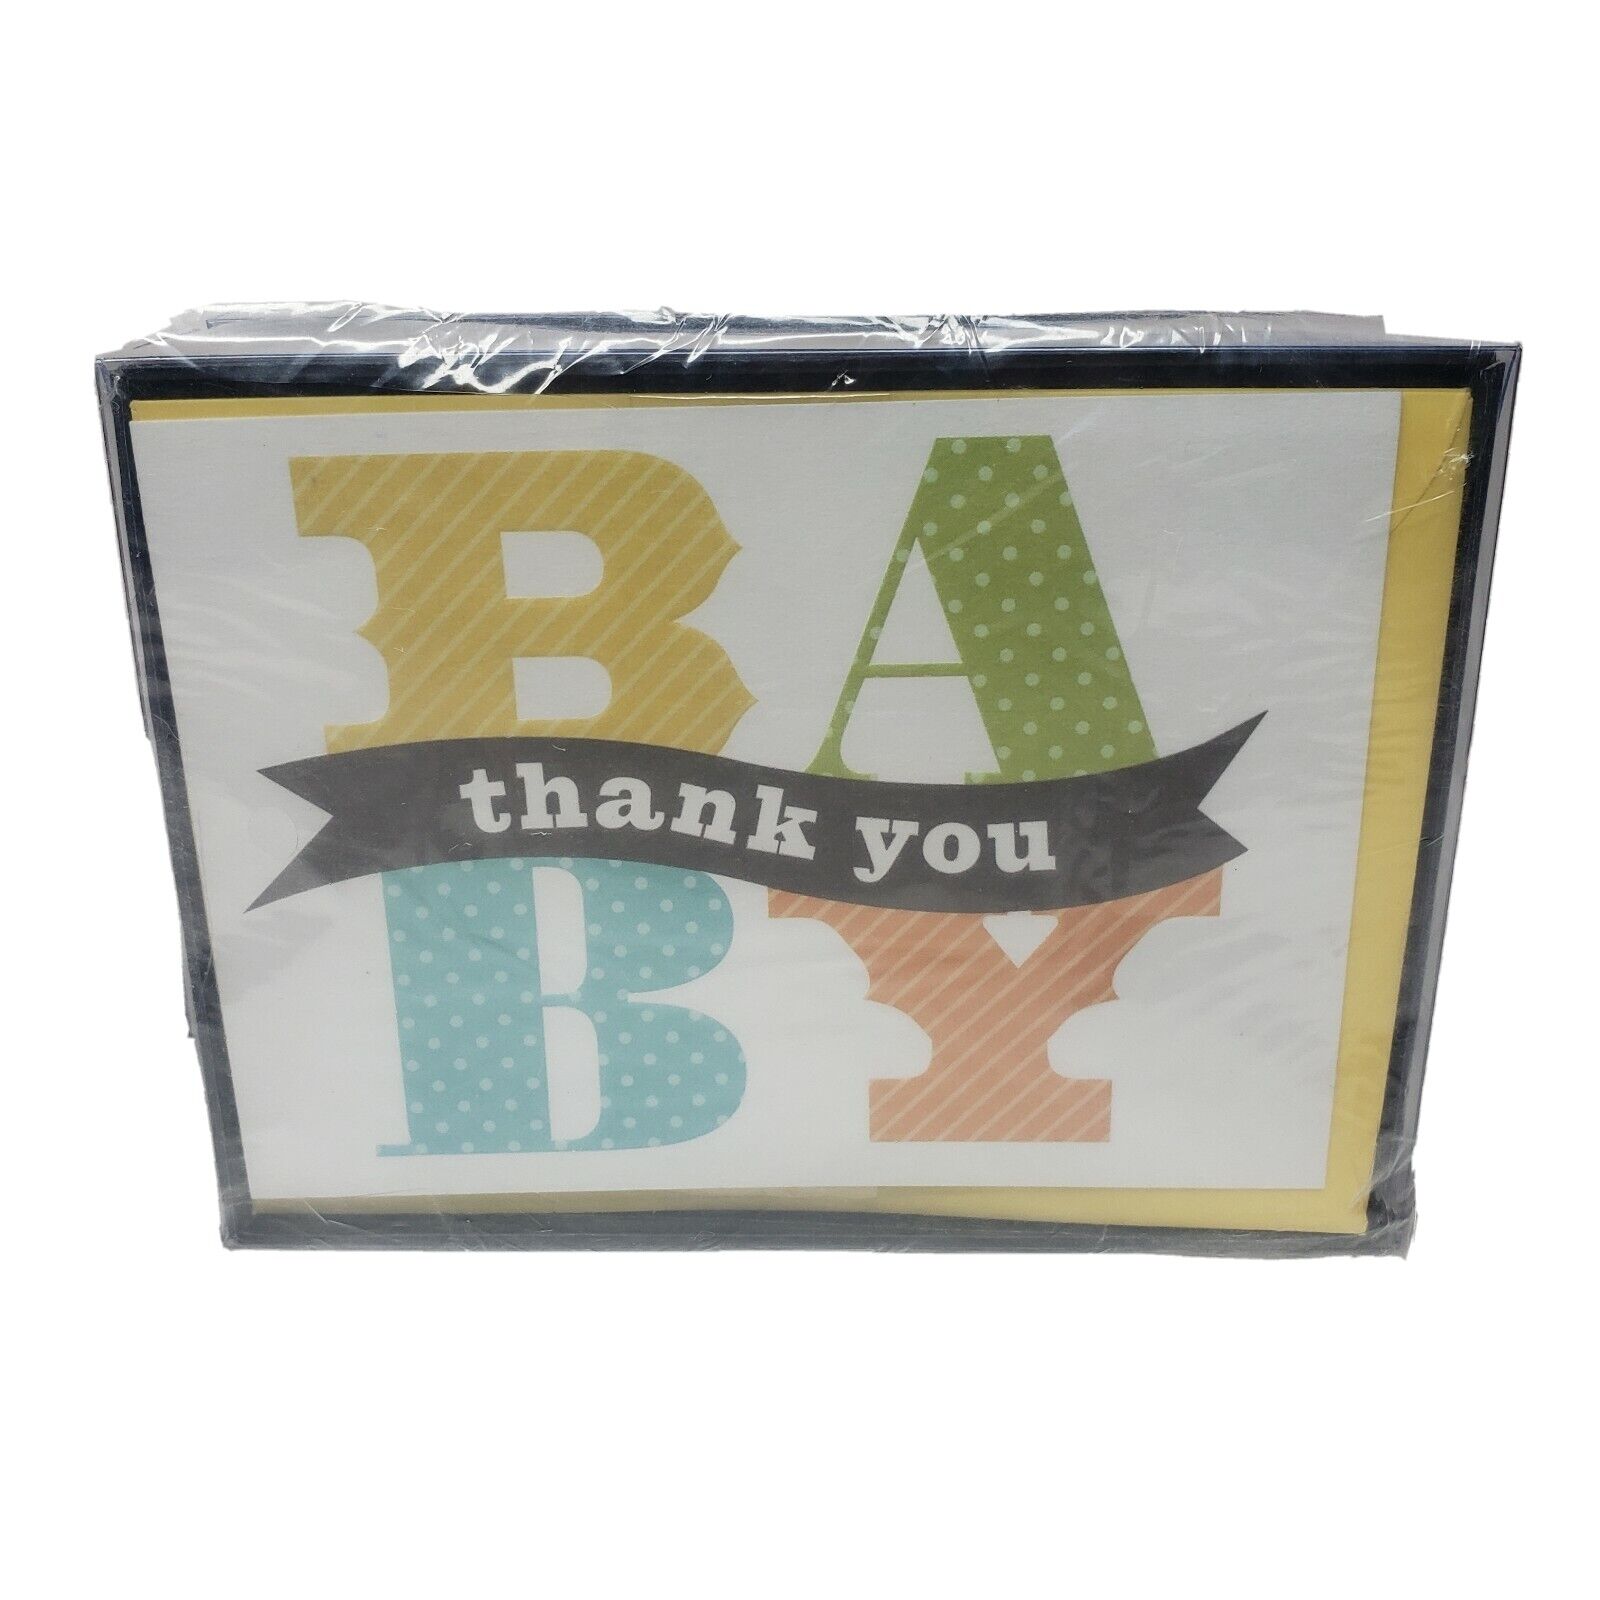 Lot Of 2 Boxes Baby Thank You Hallmark Cards 48 Cards With Envelopes Sealed New